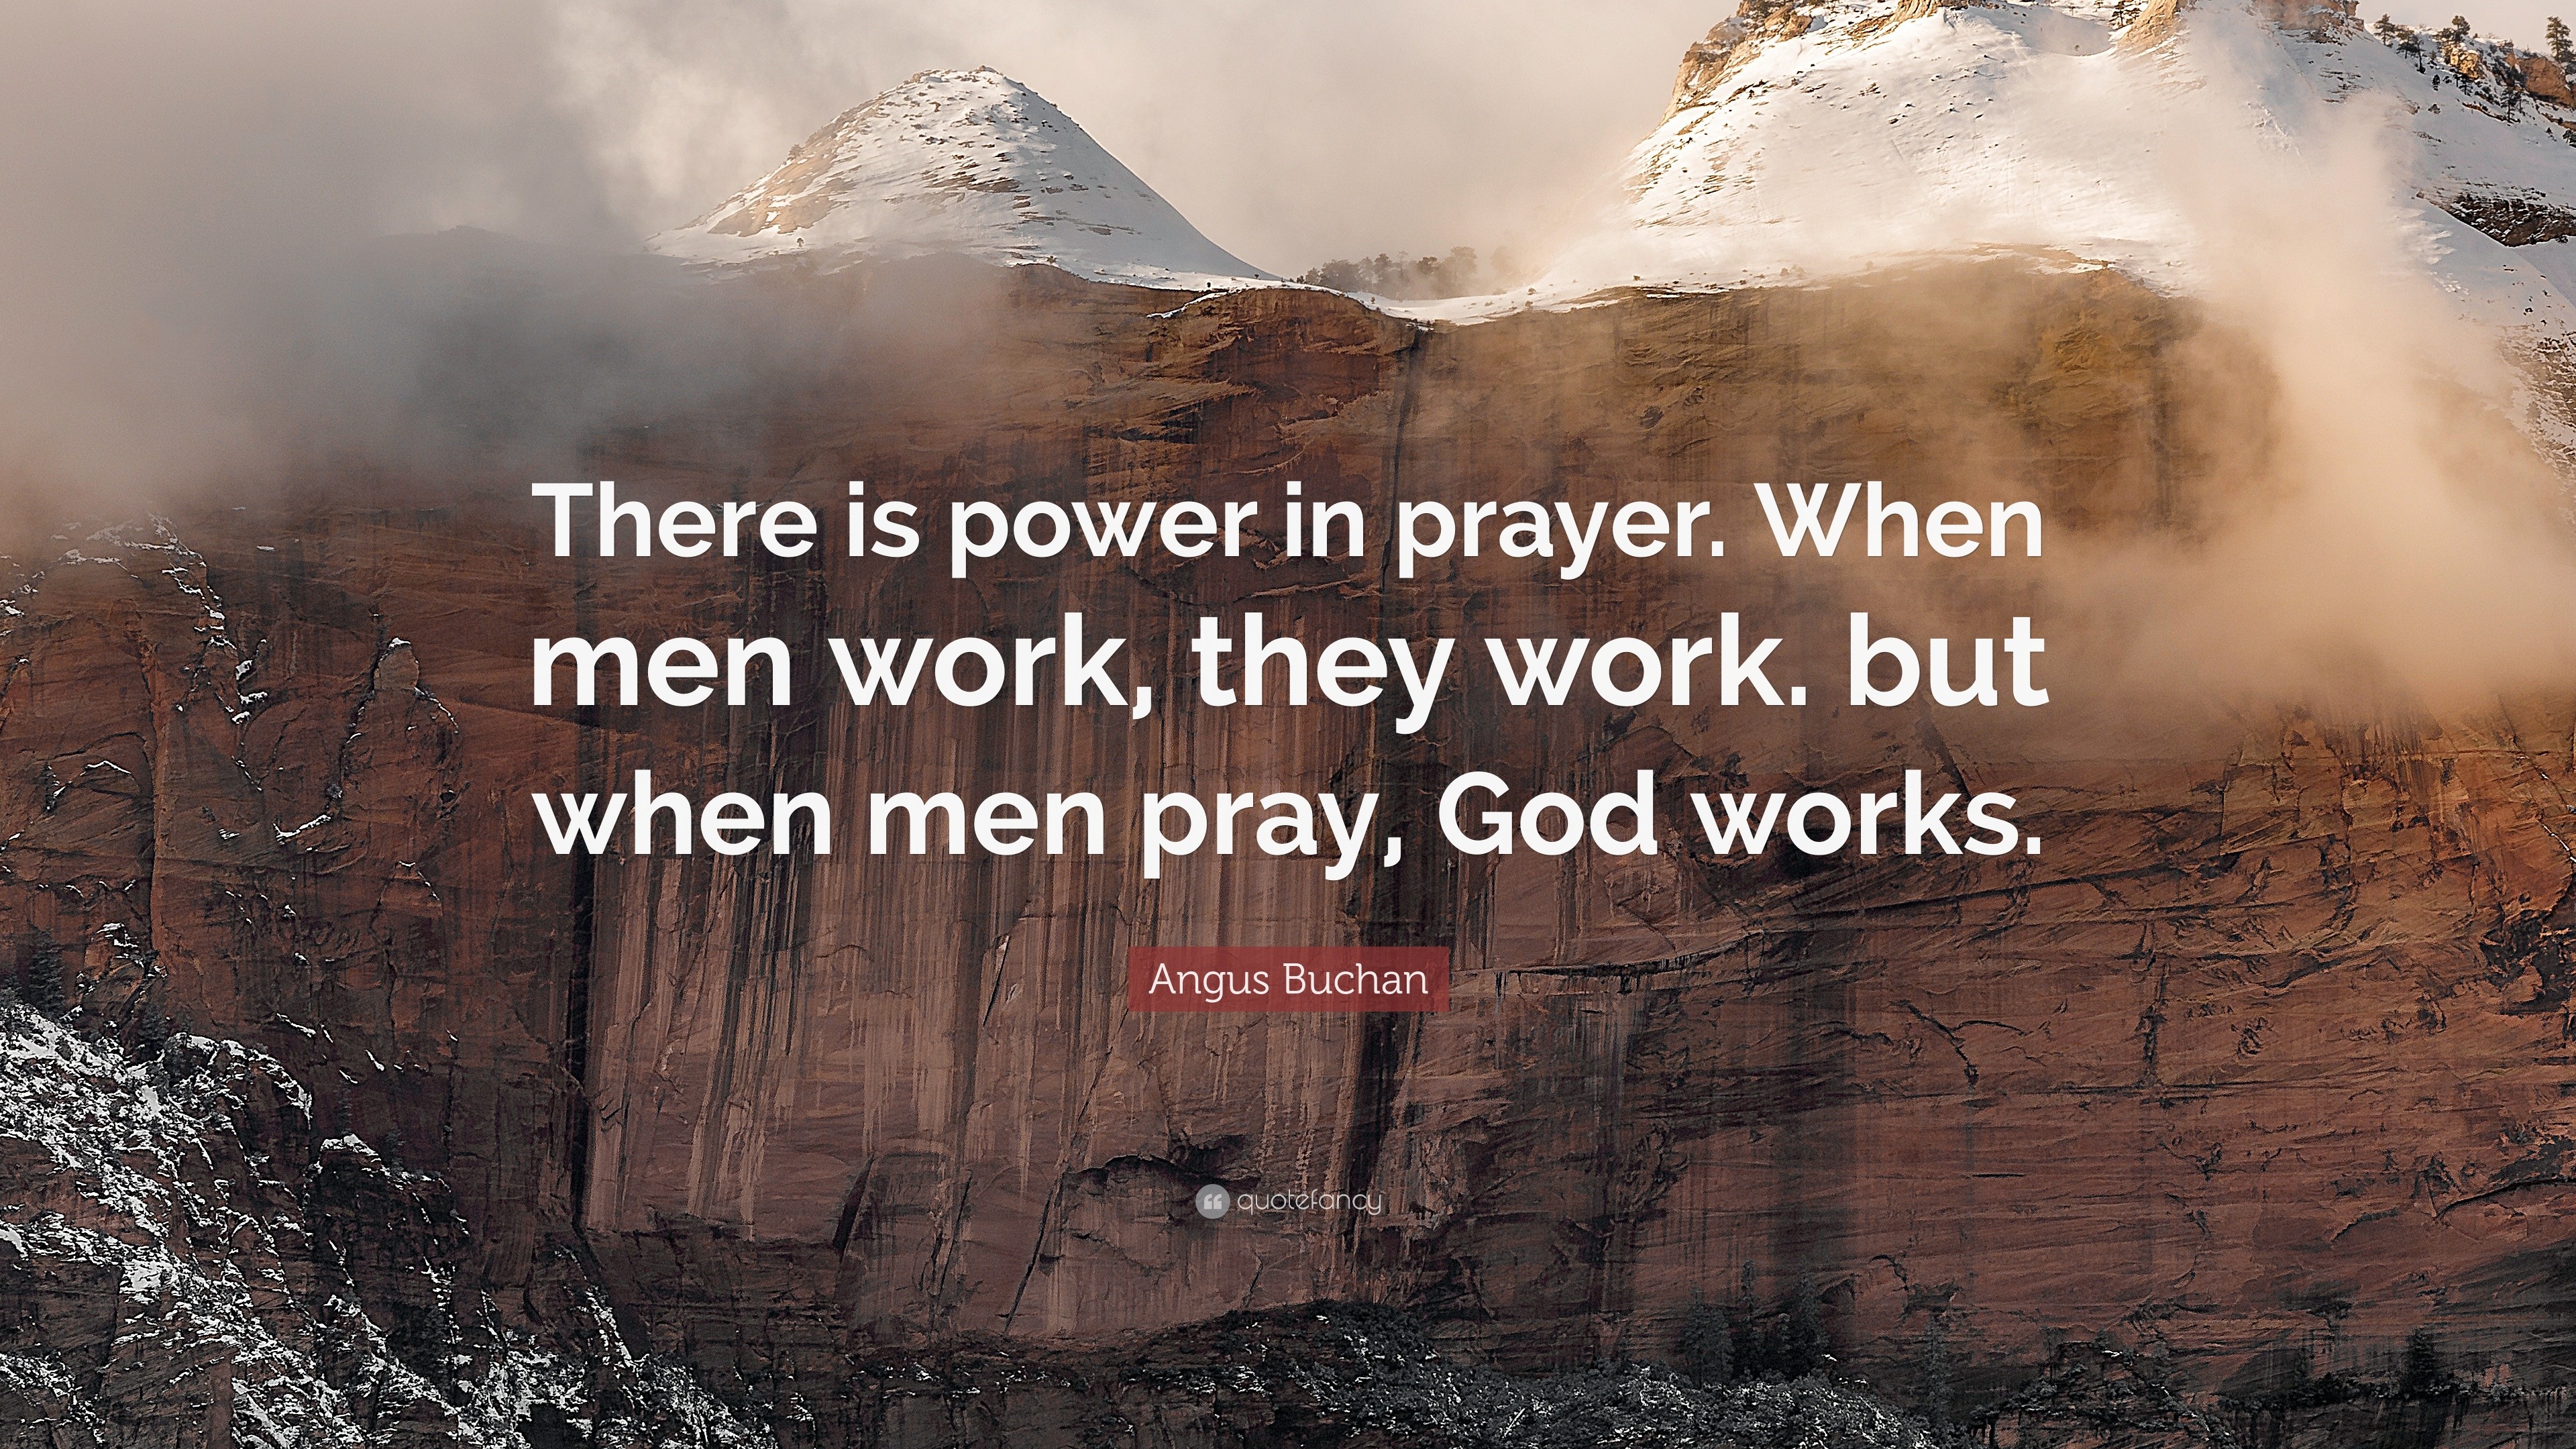 Angus Buchan Quote: “There is power in prayer. When men work, they work